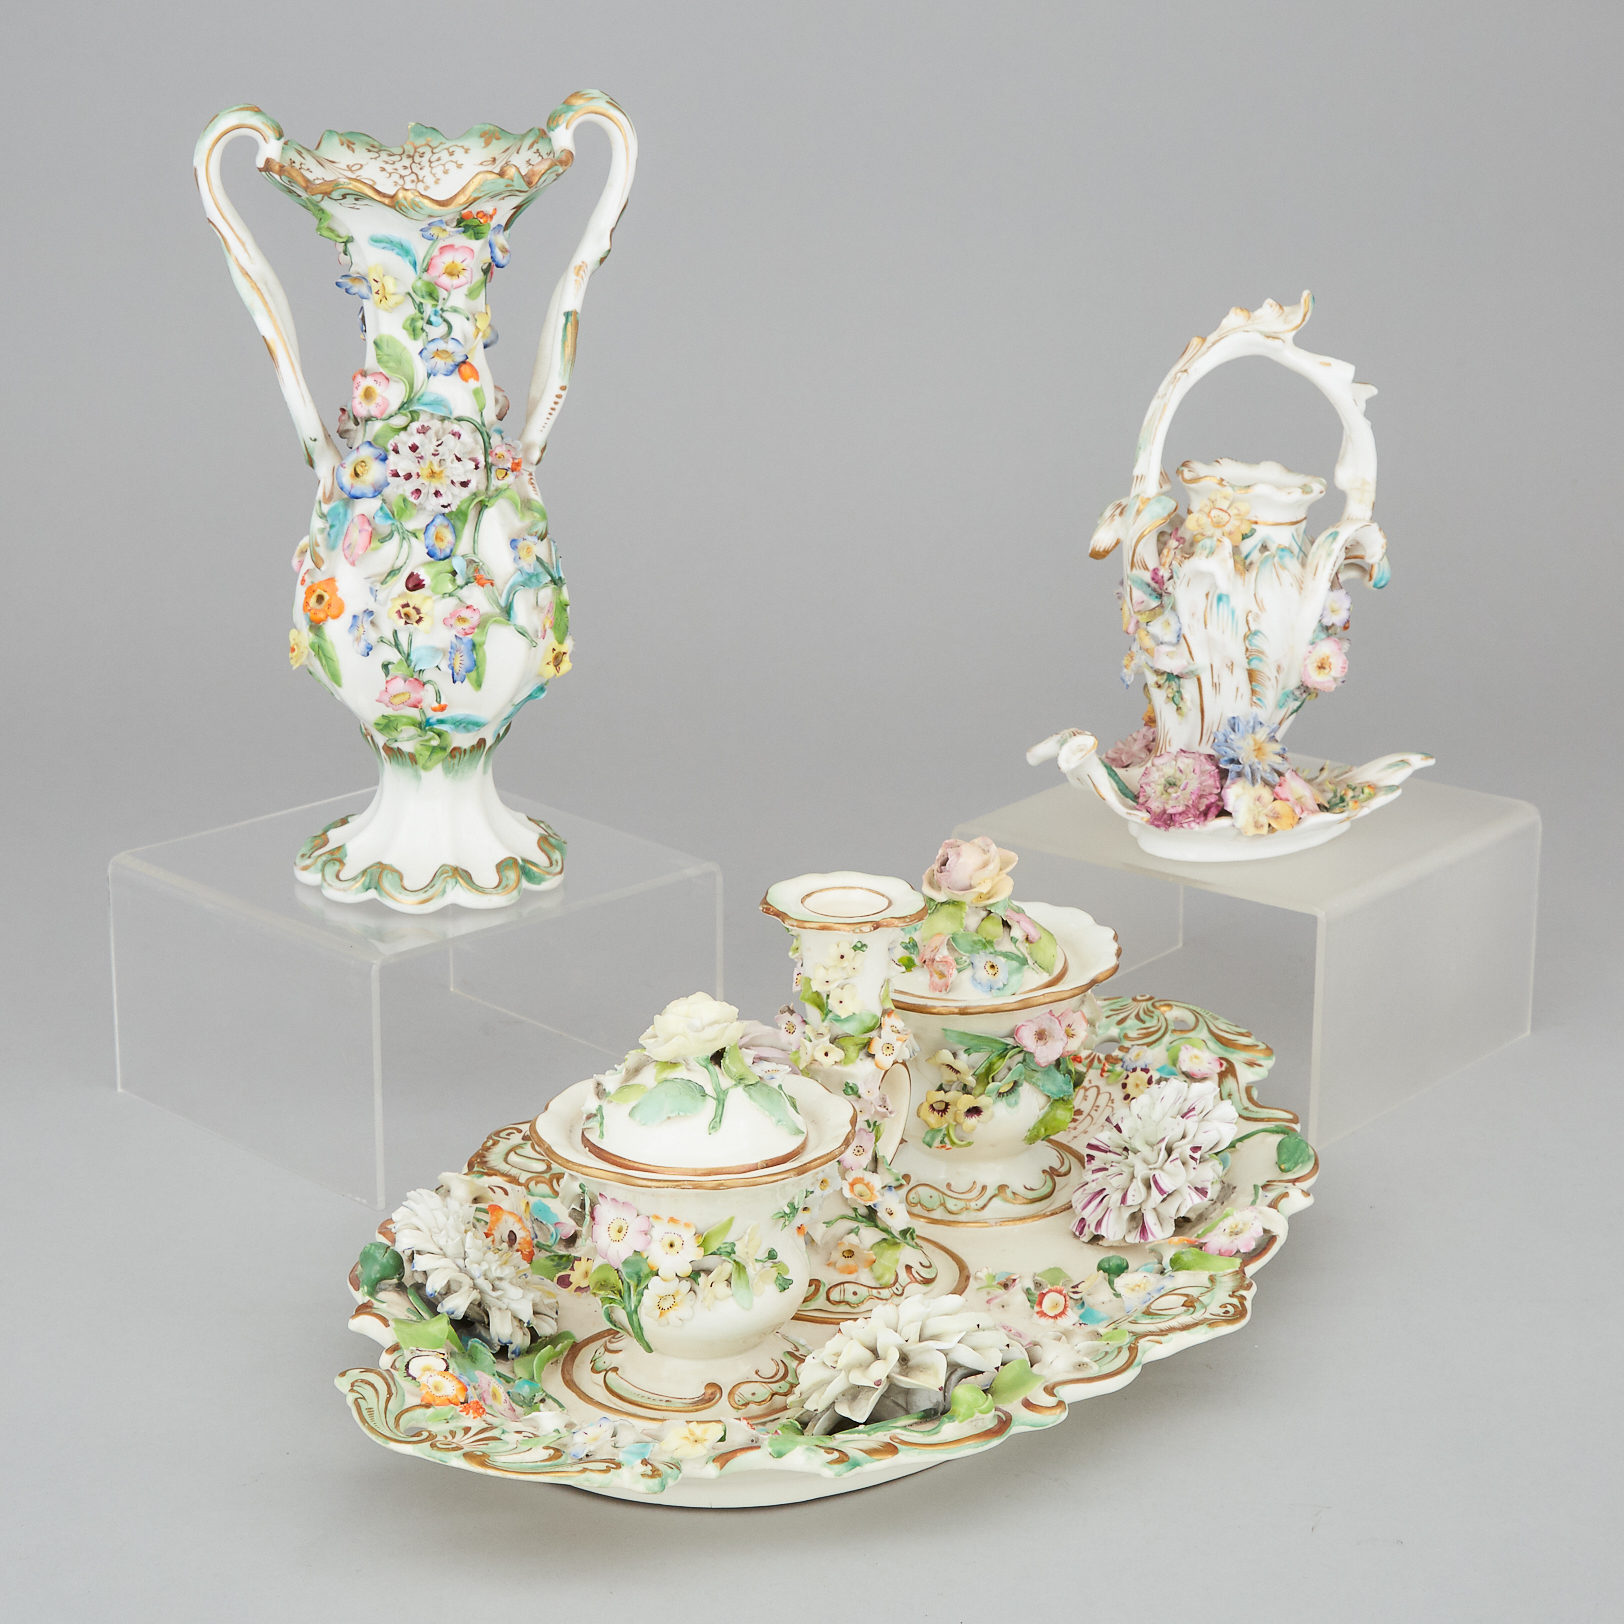 Coalbrookdale Flower-Encrusted Inkstand and Two Vases, mid-19th century